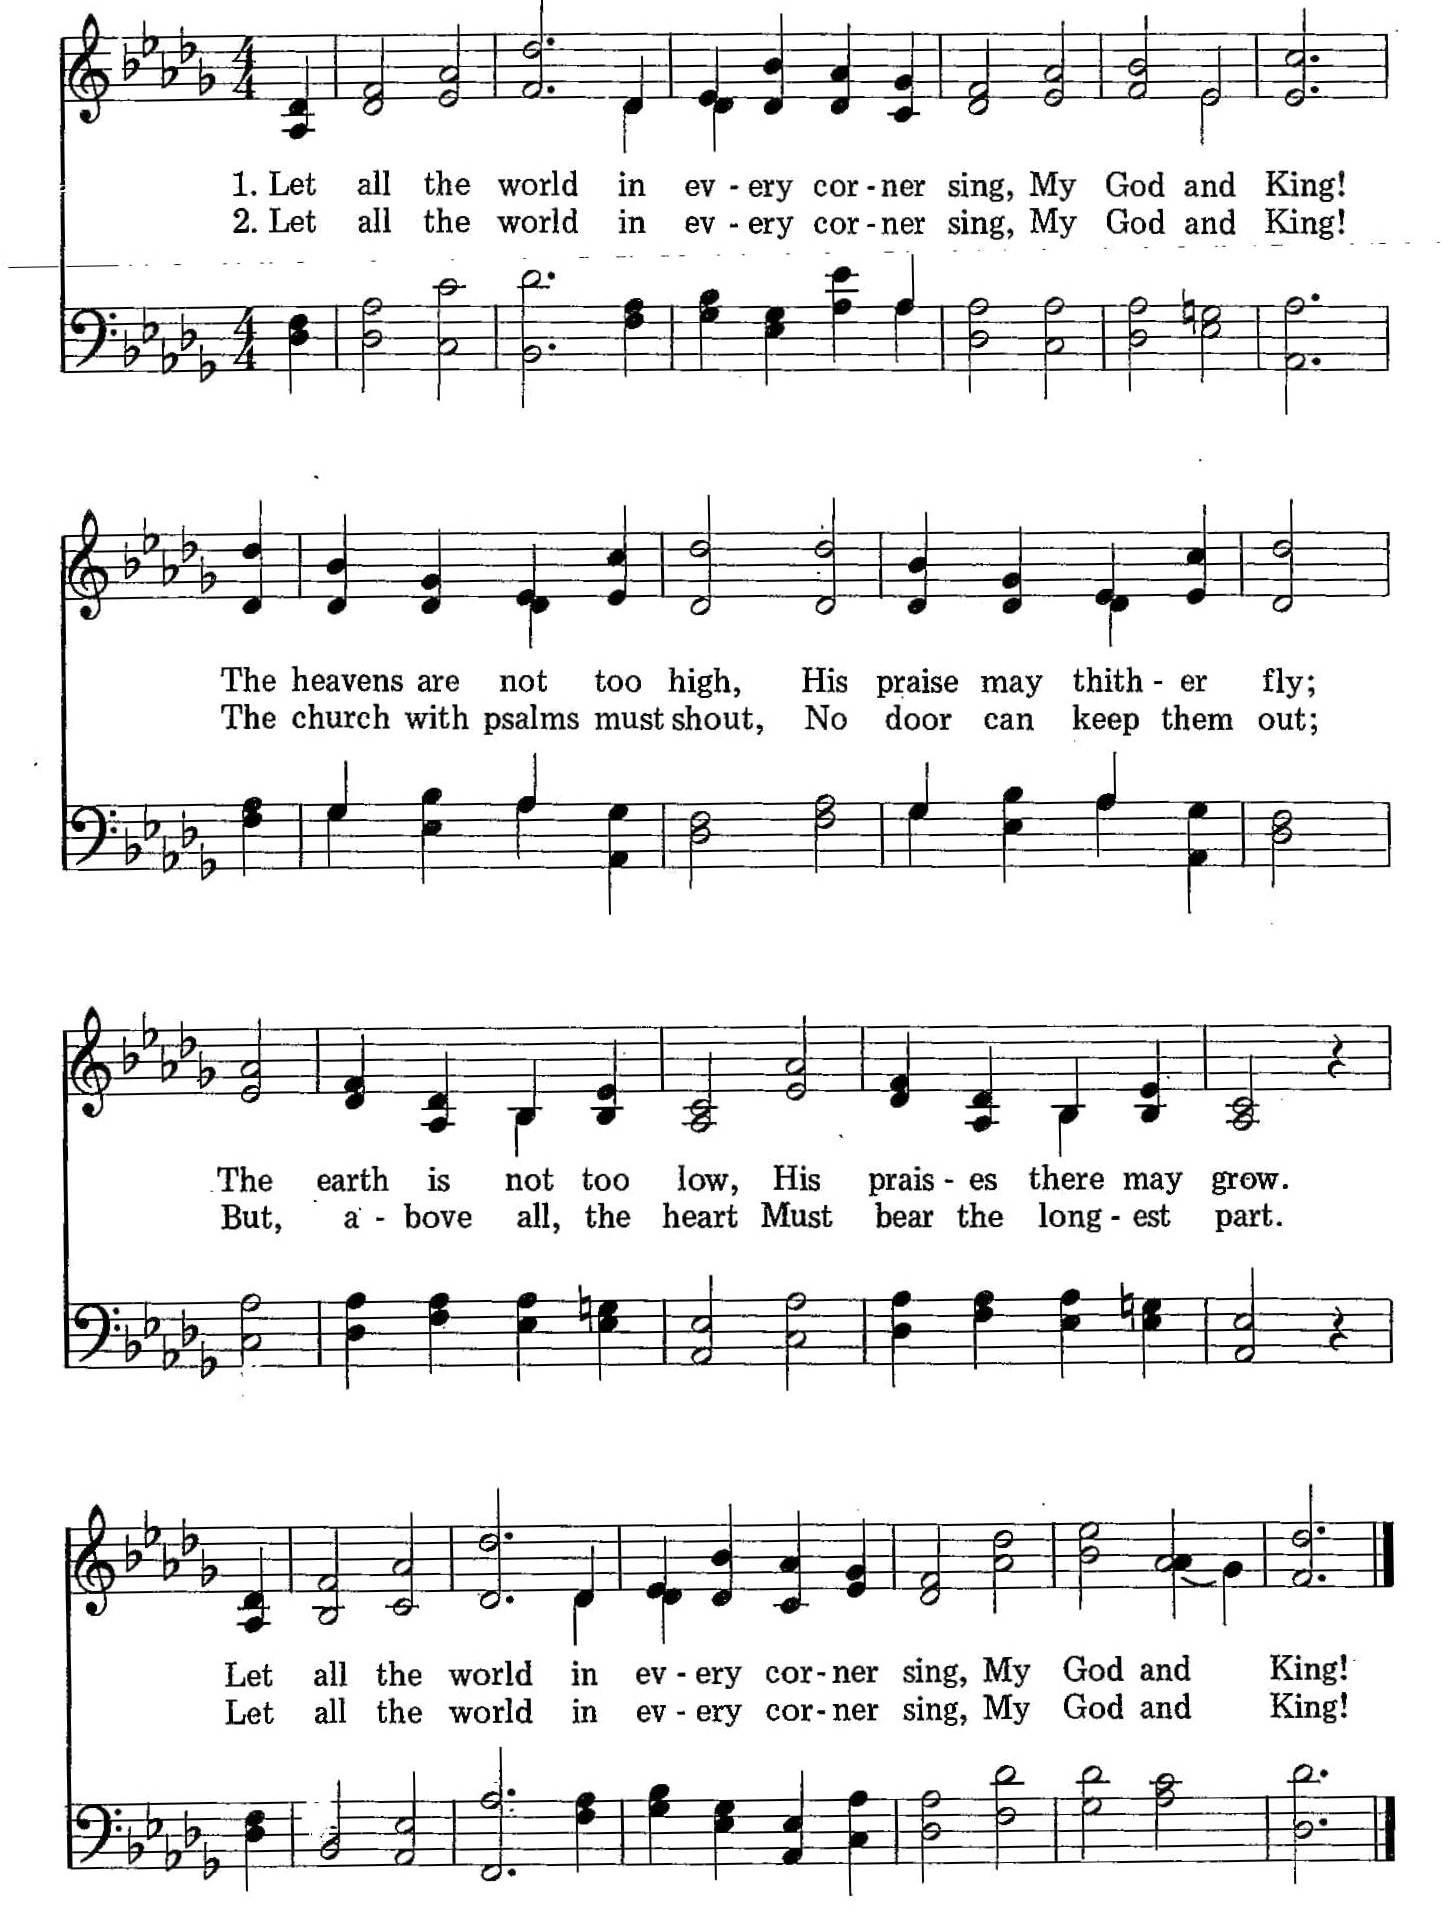 009 – Let All the World in Every Corner Sing sheet music